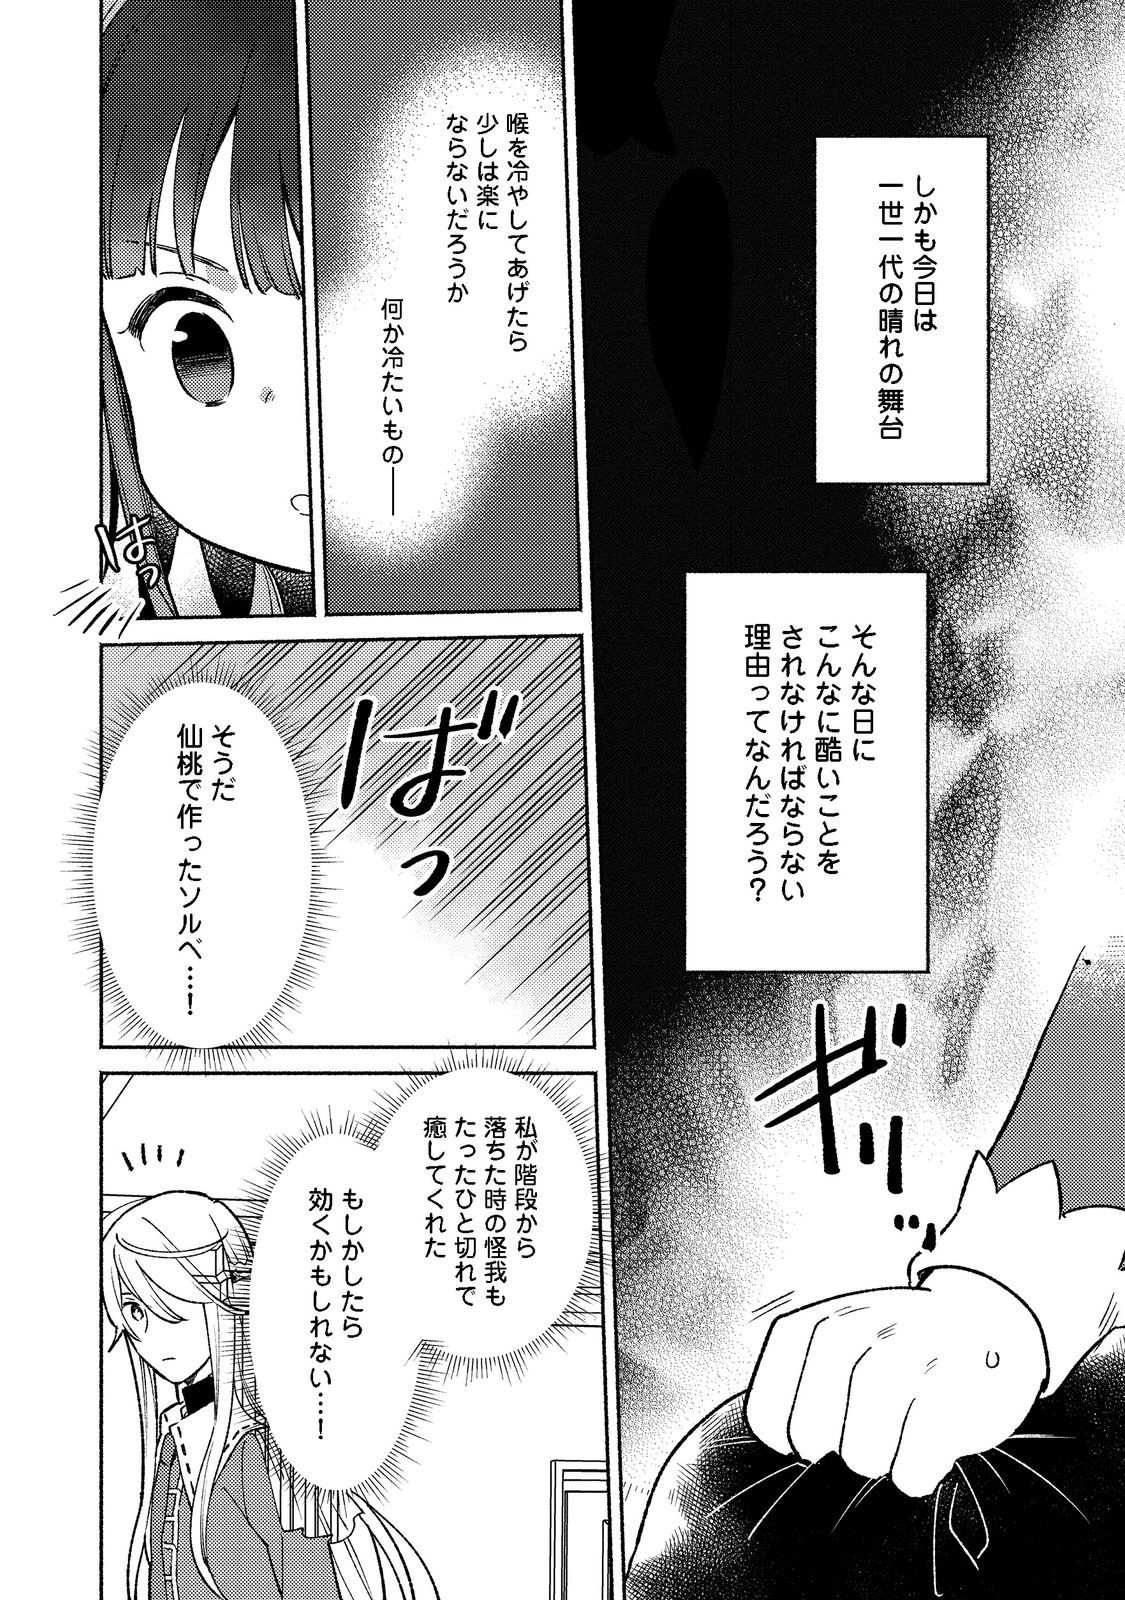 I’m the White Pig Nobleman 第15.1話 - Page 20